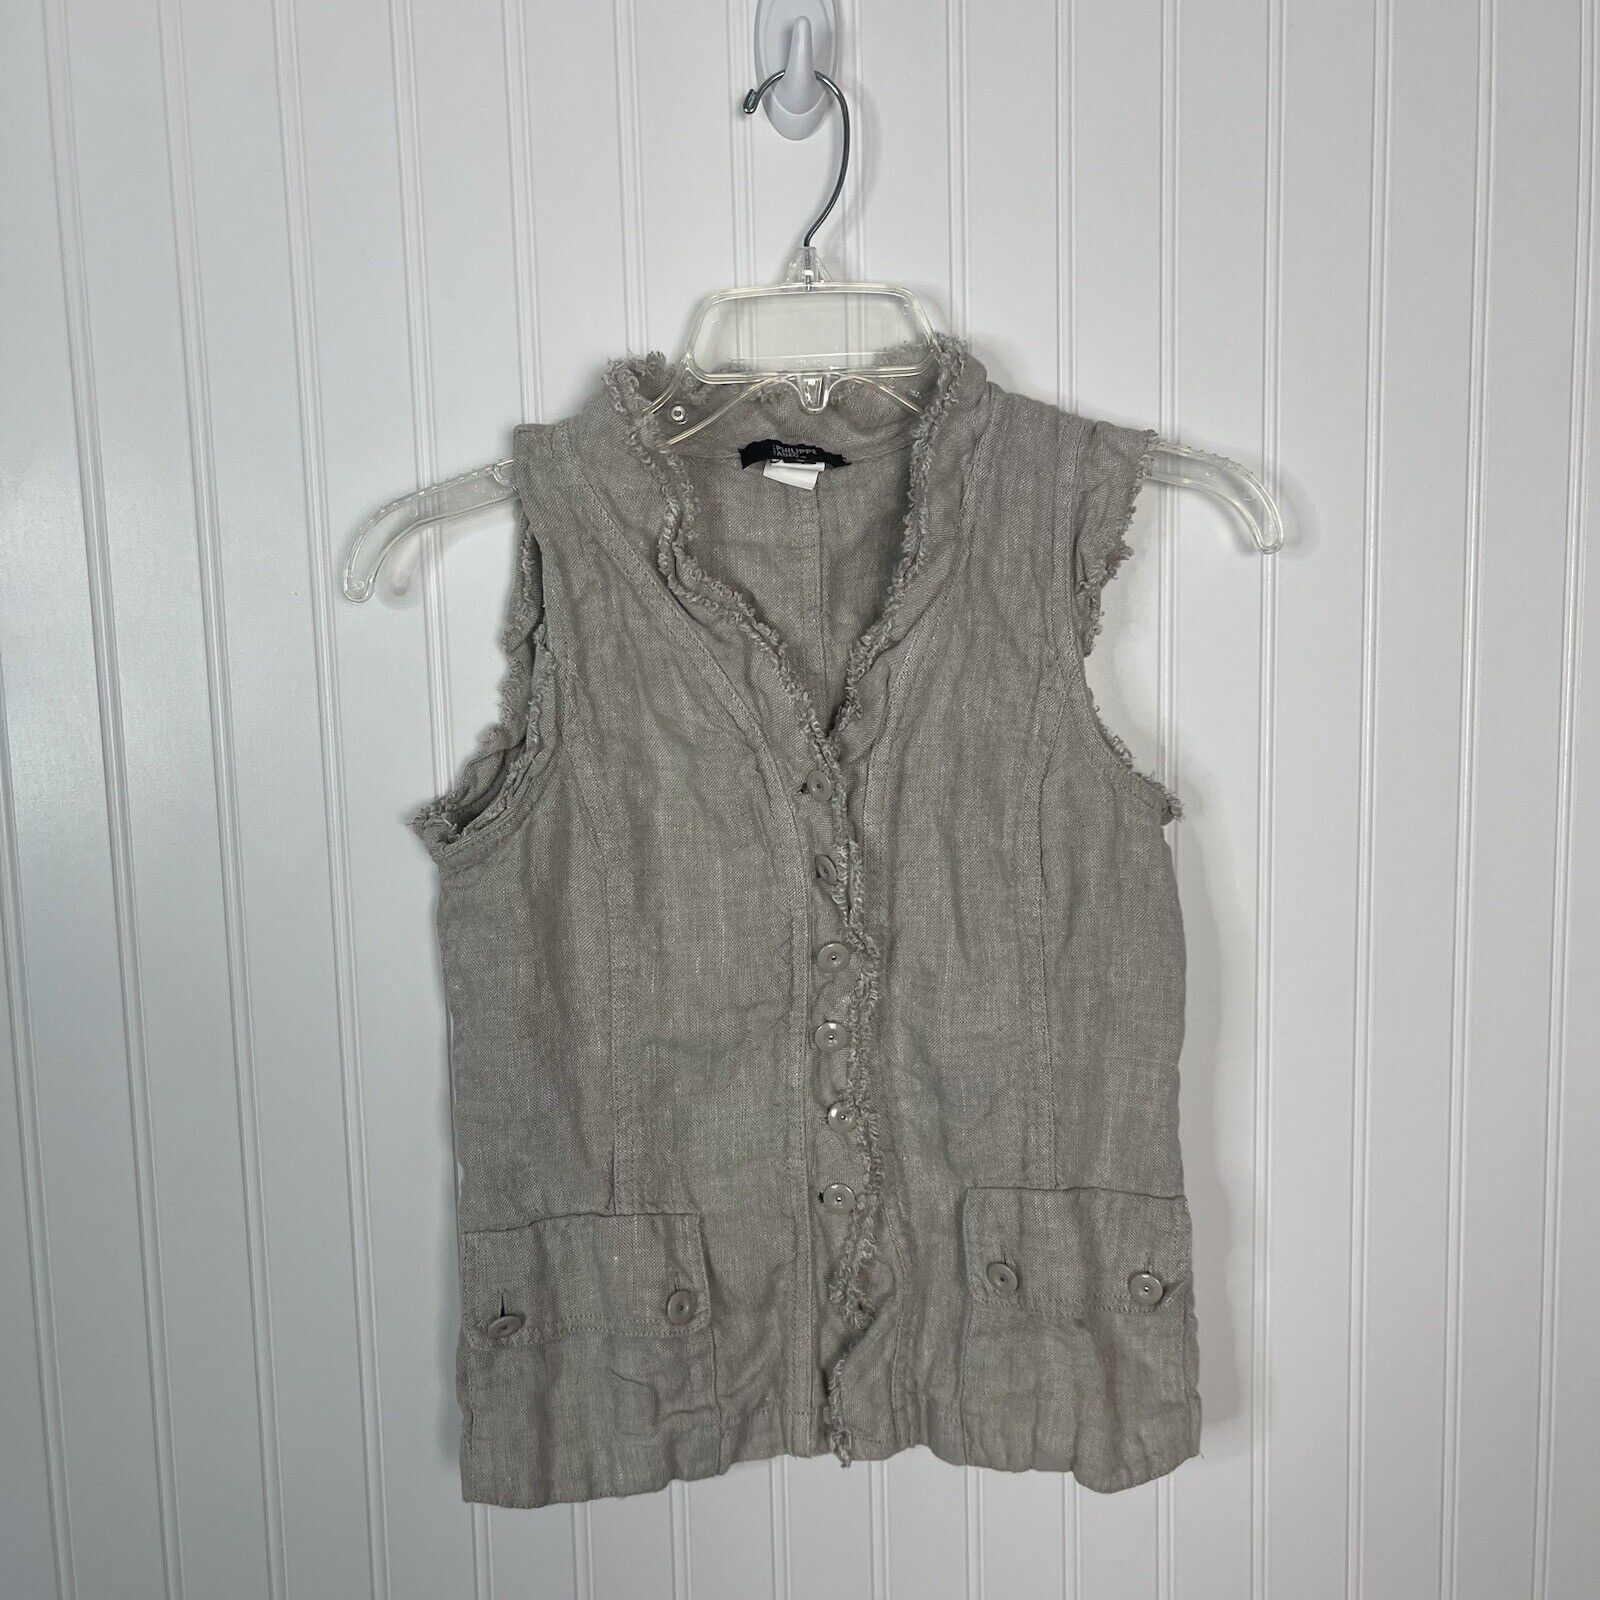 Philippe Adec Vest Sleeveless 6 Women Beige Line casual Button Up